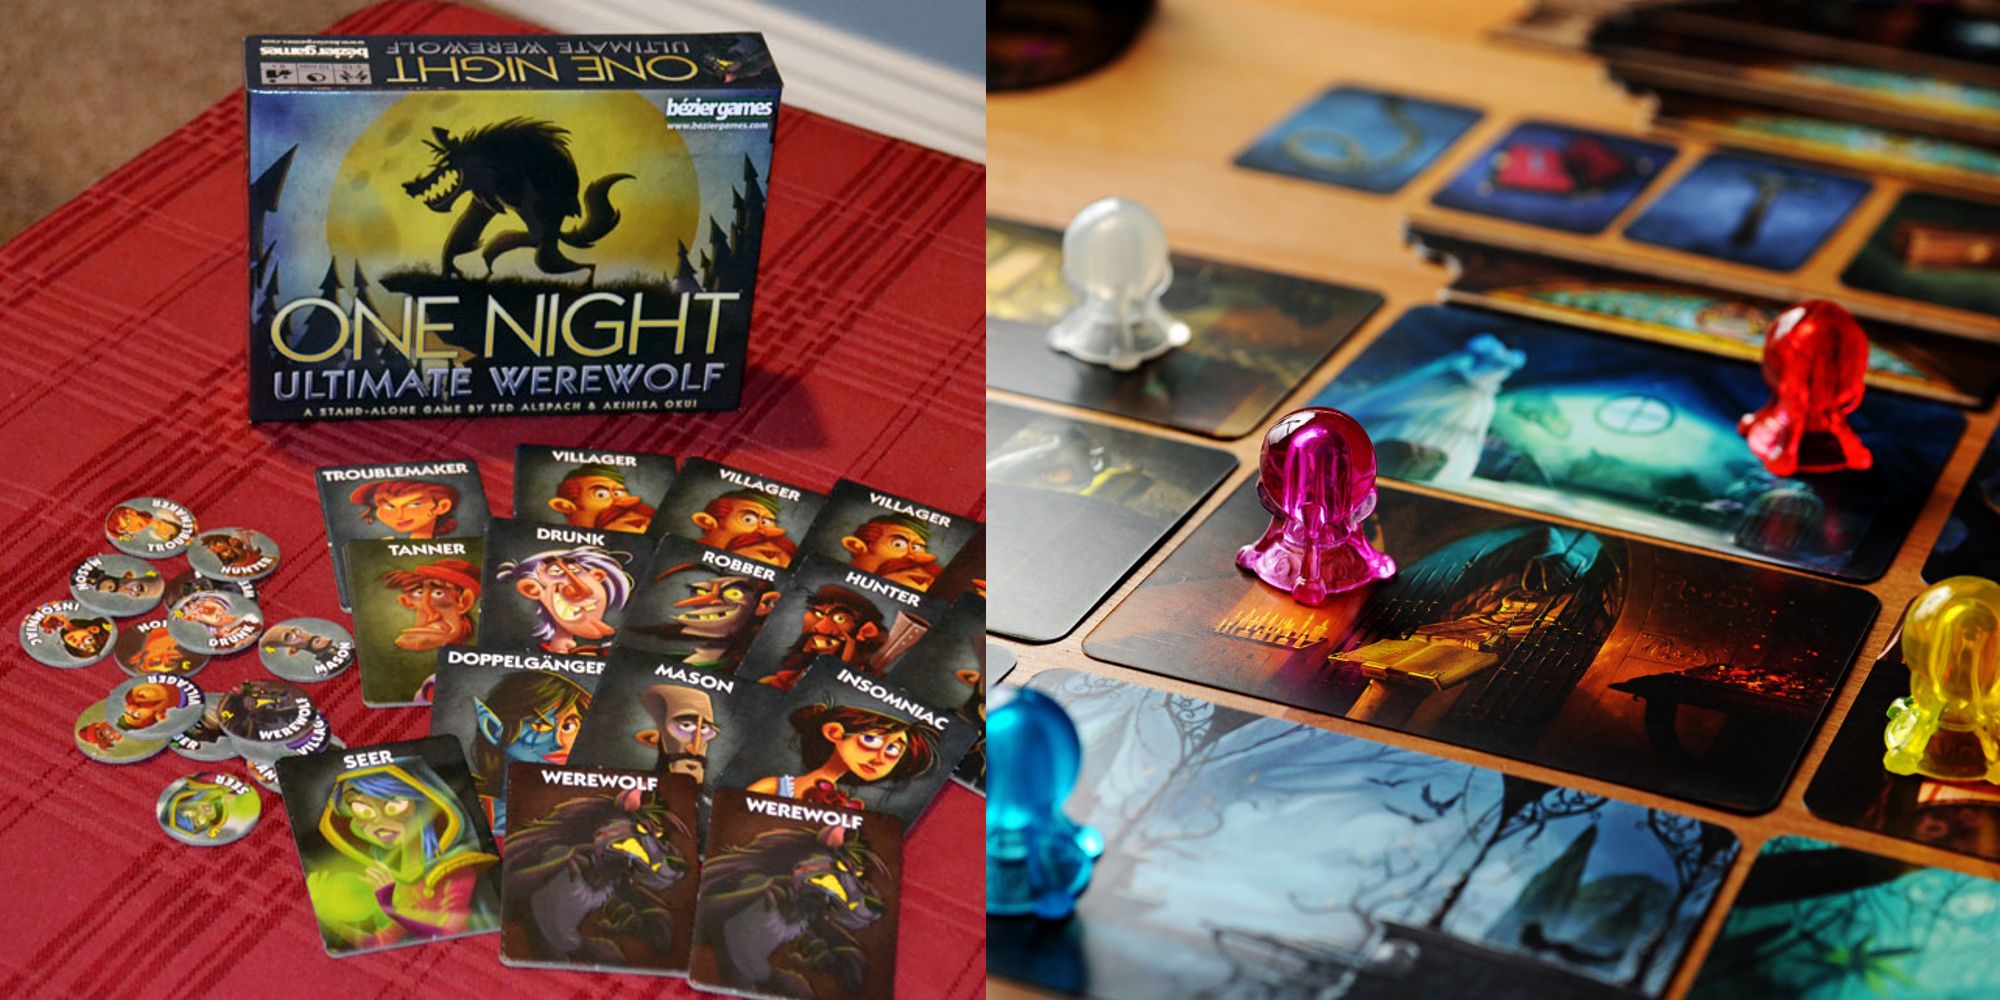 The game box, cards, and tokens for One Night Ultimate Werewolf; cards and game pieces for Mysterium in play